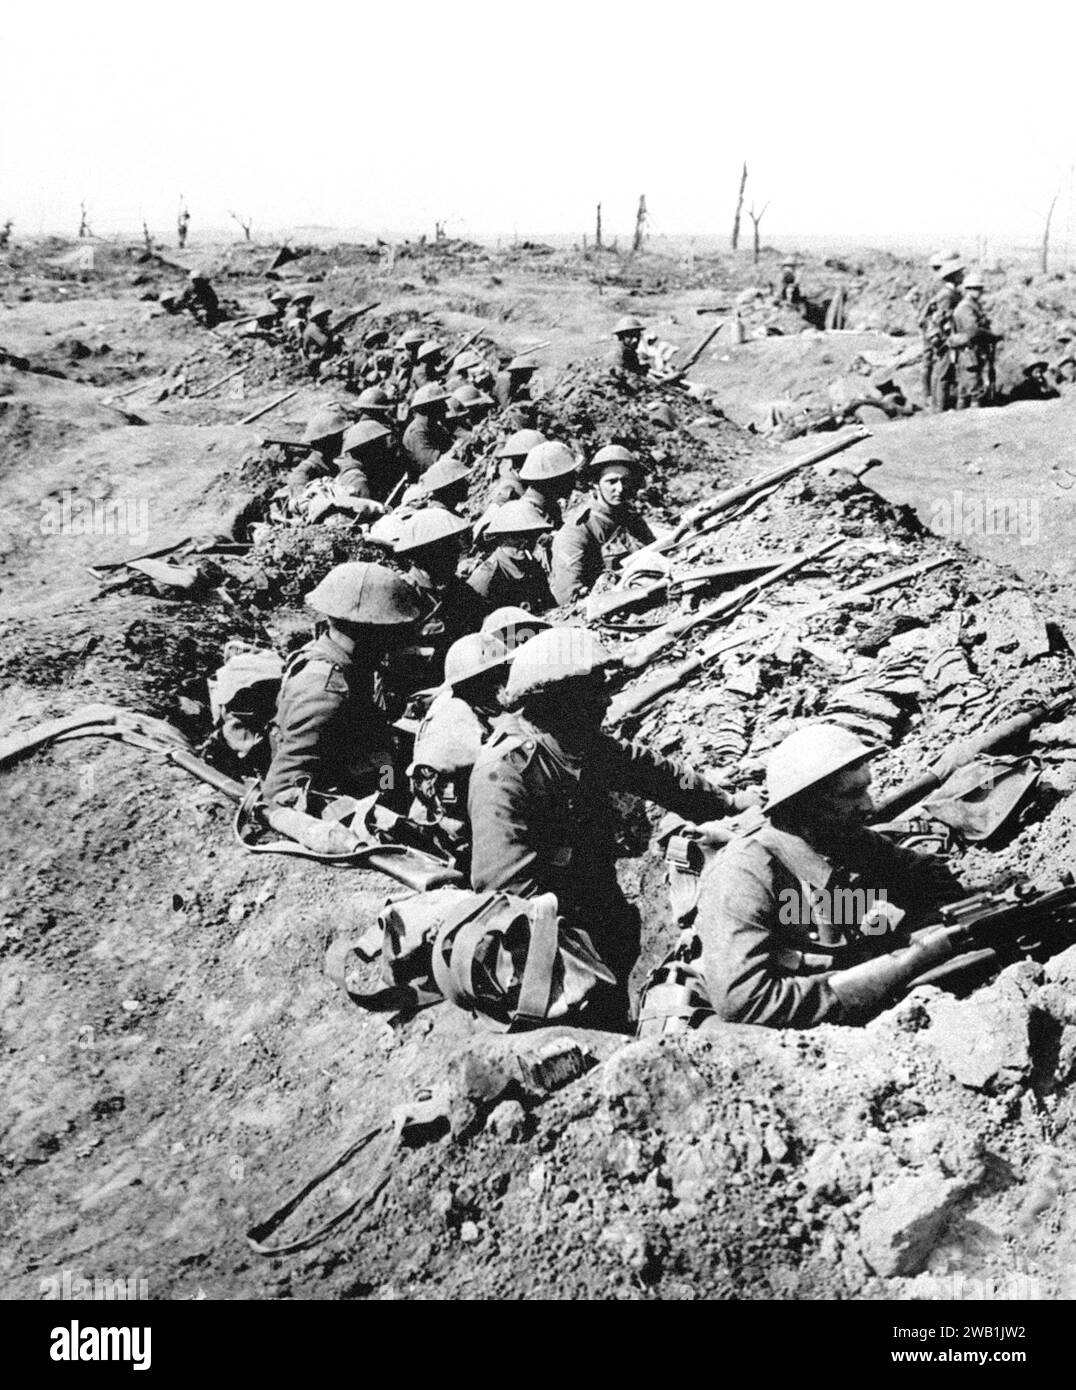 File photo dated 1/7/1916 of British infantrymen occupy a shallow trench in a ruined landscape before an advance during the Battle of the Somme. UK scientists have uncovered "exciting and significant" new insights into how German soldiers used a crater - created after a mine explosion by the British - to their advantage during the First World War. The detonation of the Hawthorn Ridge, near the village of Beaumont Hamel in France, signalled the start of the Battle of the Somme on the morning of July 1 1916 - often described as the bloodiest day in the history of the British Army. Issue date: Mo Stock Photo